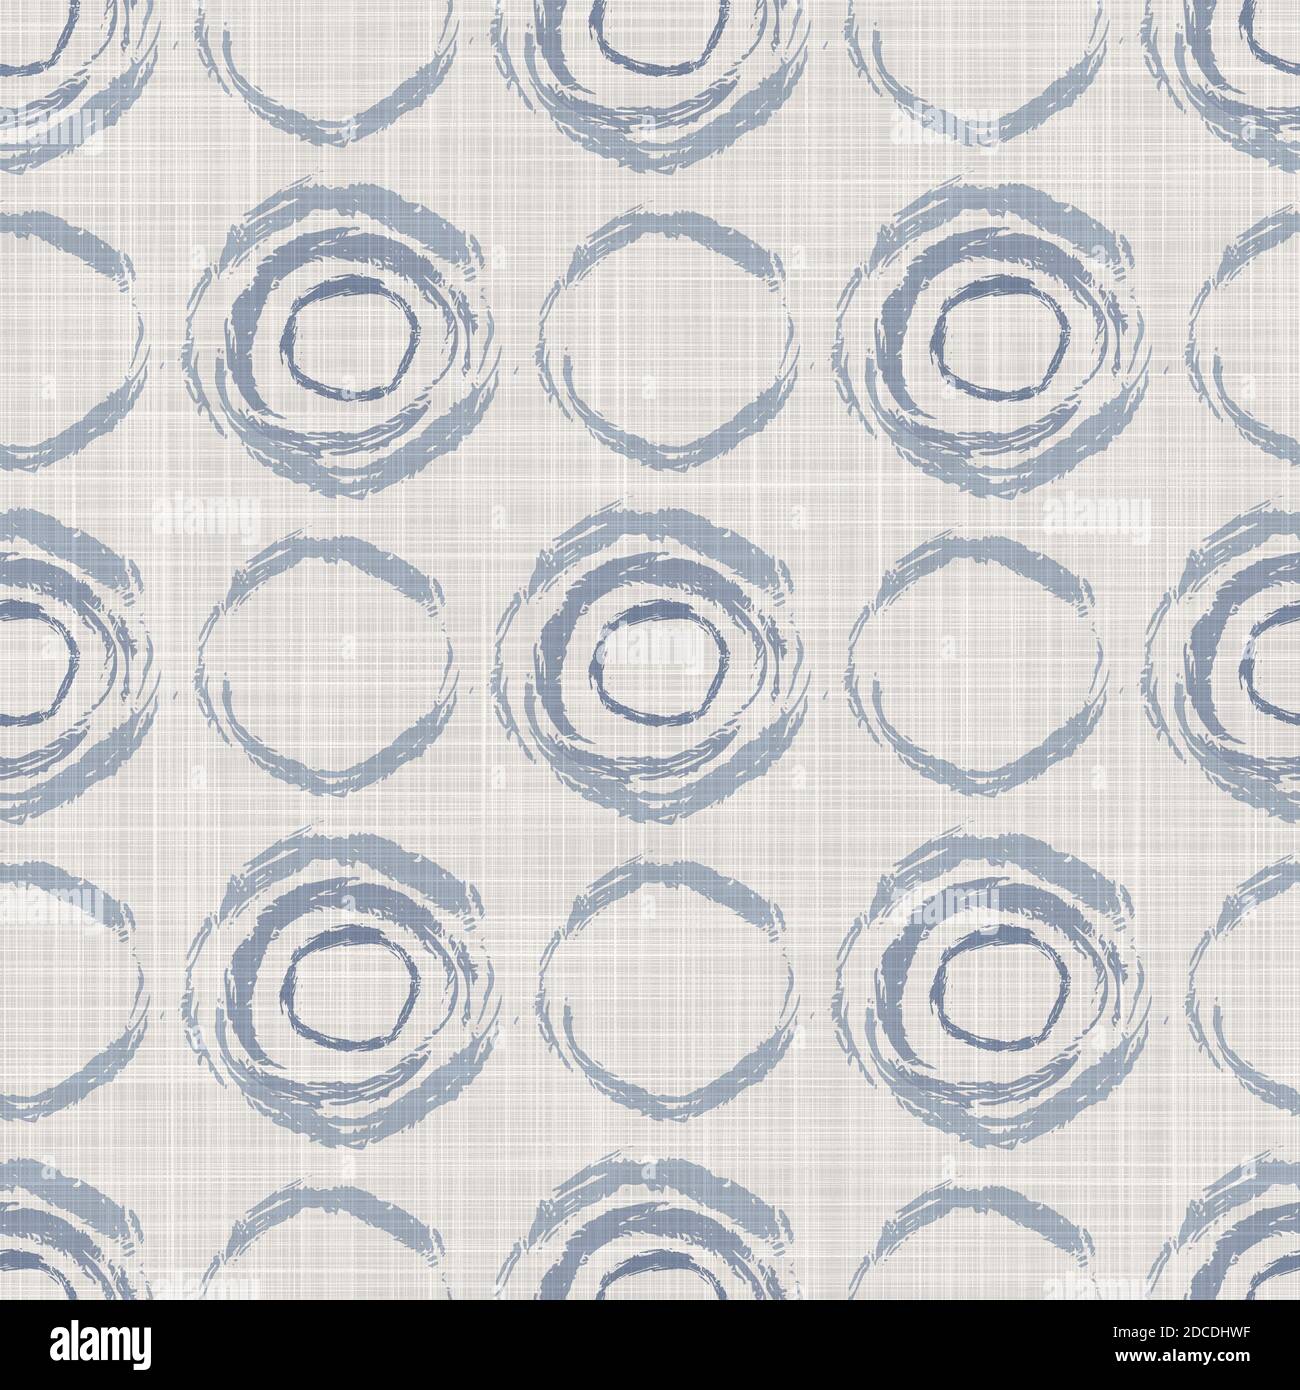 Seamless french farmhouse dotty linen pattern. Provence blue white woven  texture. Shabby chic style decorative circle dot fabric background. Textile  Stock Photo - Alamy